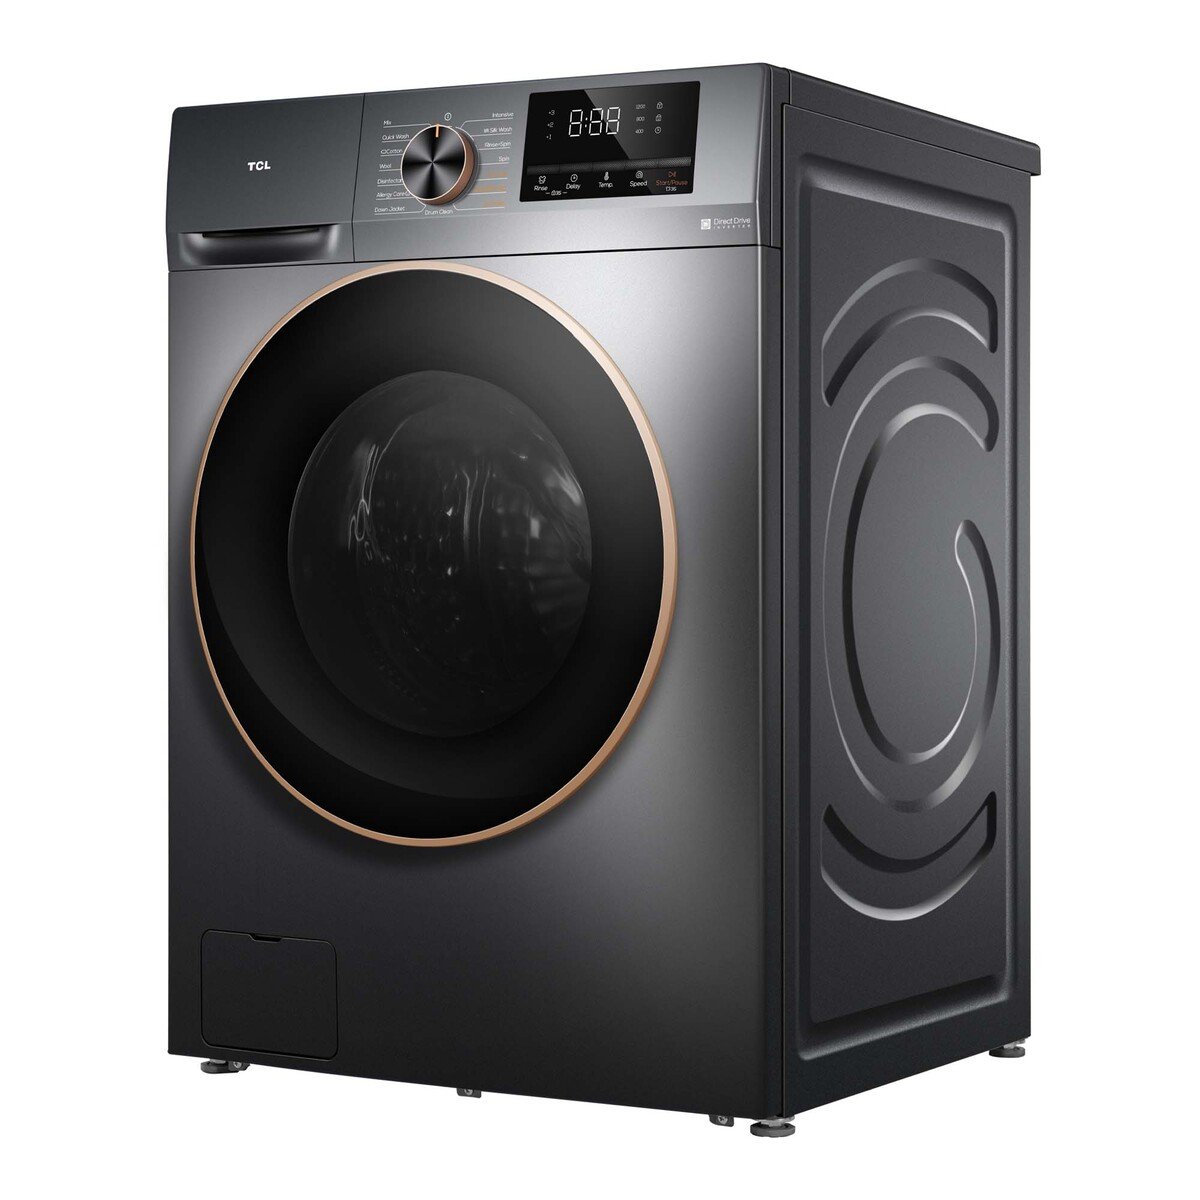 TCL Fully Automatic Front Loading Washing Machine, 10 Kg Washer & 6 Kg Dryer, 1200 RPM, Star Grey, C210WDG